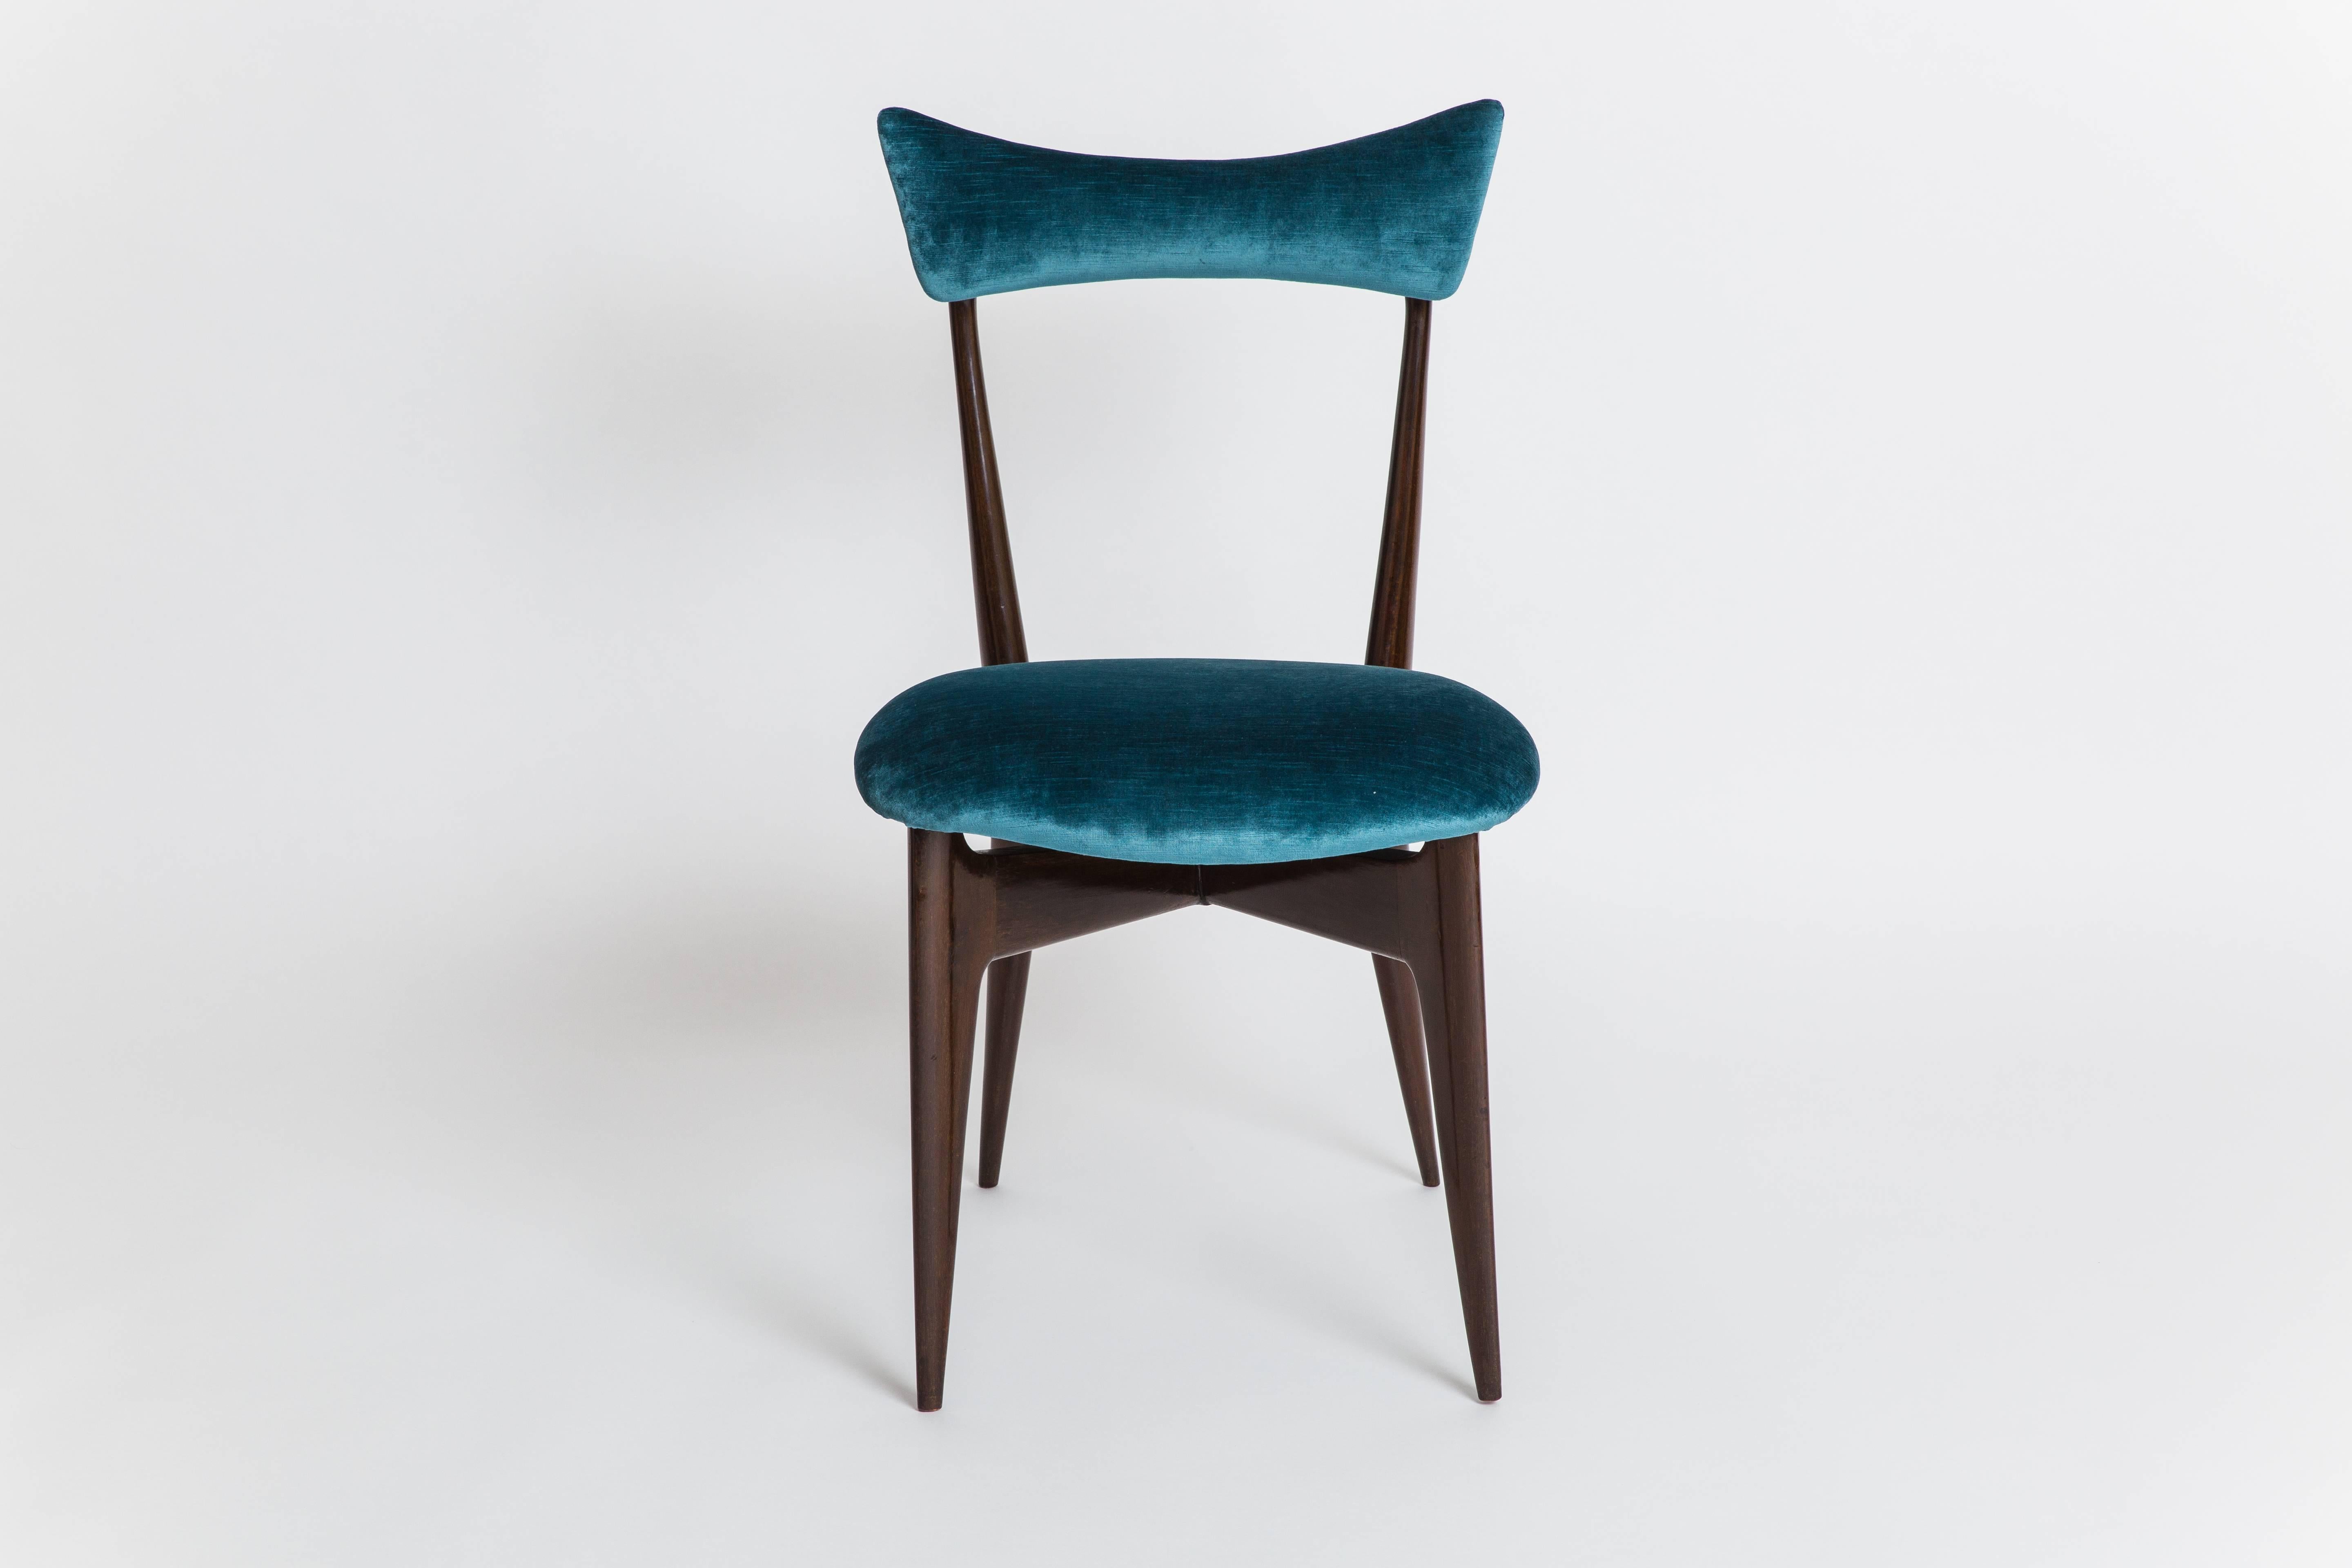 Ico & Luisa Parisi for Ariberto Colombo, Cantù, set of six rare rosewood dining chairs. Sculptural frame with slightly curved butterfly-shaped upholstered backrest, upholstered seat suspended on the pointed corner supports of the underlying x-shaped